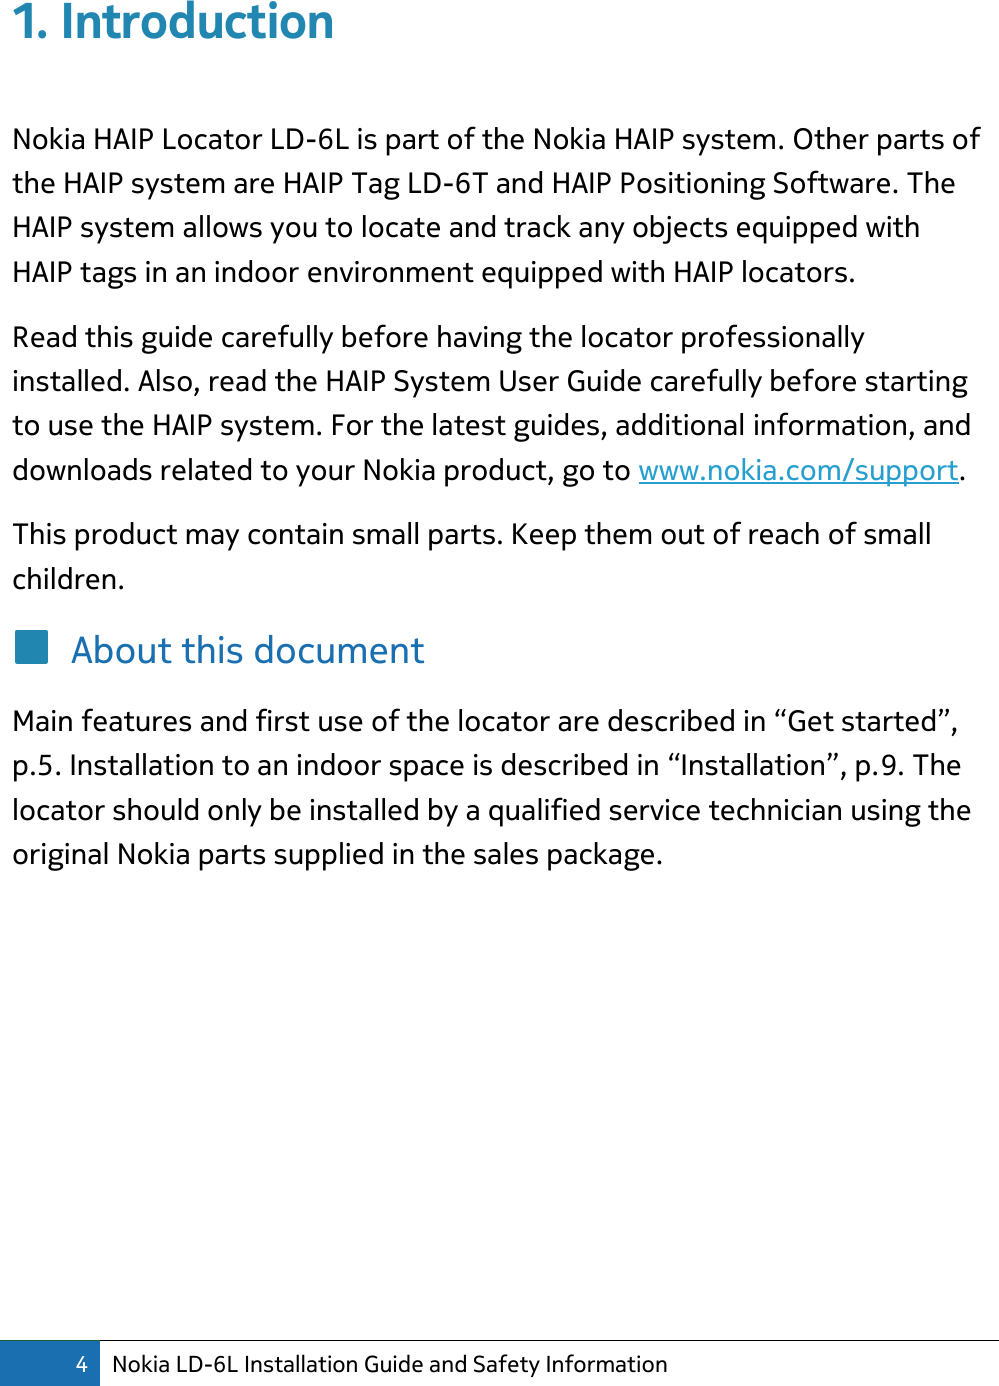 4 Nokia LD-6L Installation Guide and Safety Information  1. Introduction  Nokia HAIP Locator LD-6L is part of the Nokia HAIP system. Other parts of the HAIP system are HAIP Tag LD-6T and HAIP Positioning Software. The HAIP system allows you to locate and track any objects equipped with HAIP tags in an indoor environment equipped with HAIP locators. Read this guide carefully before having the locator professionally installed. Also, read the HAIP System User Guide carefully before starting to use the HAIP system. For the latest guides, additional information, and downloads related to your Nokia product, go to www.nokia.com/support. This product may contain small parts. Keep them out of reach of small children. About this document Main features and first use of the locator are described in “Get started”, p.5. Installation to an indoor space is described in “Installation”, p.9. The locator should only be installed by a qualified service technician using the original Nokia parts supplied in the sales package.         